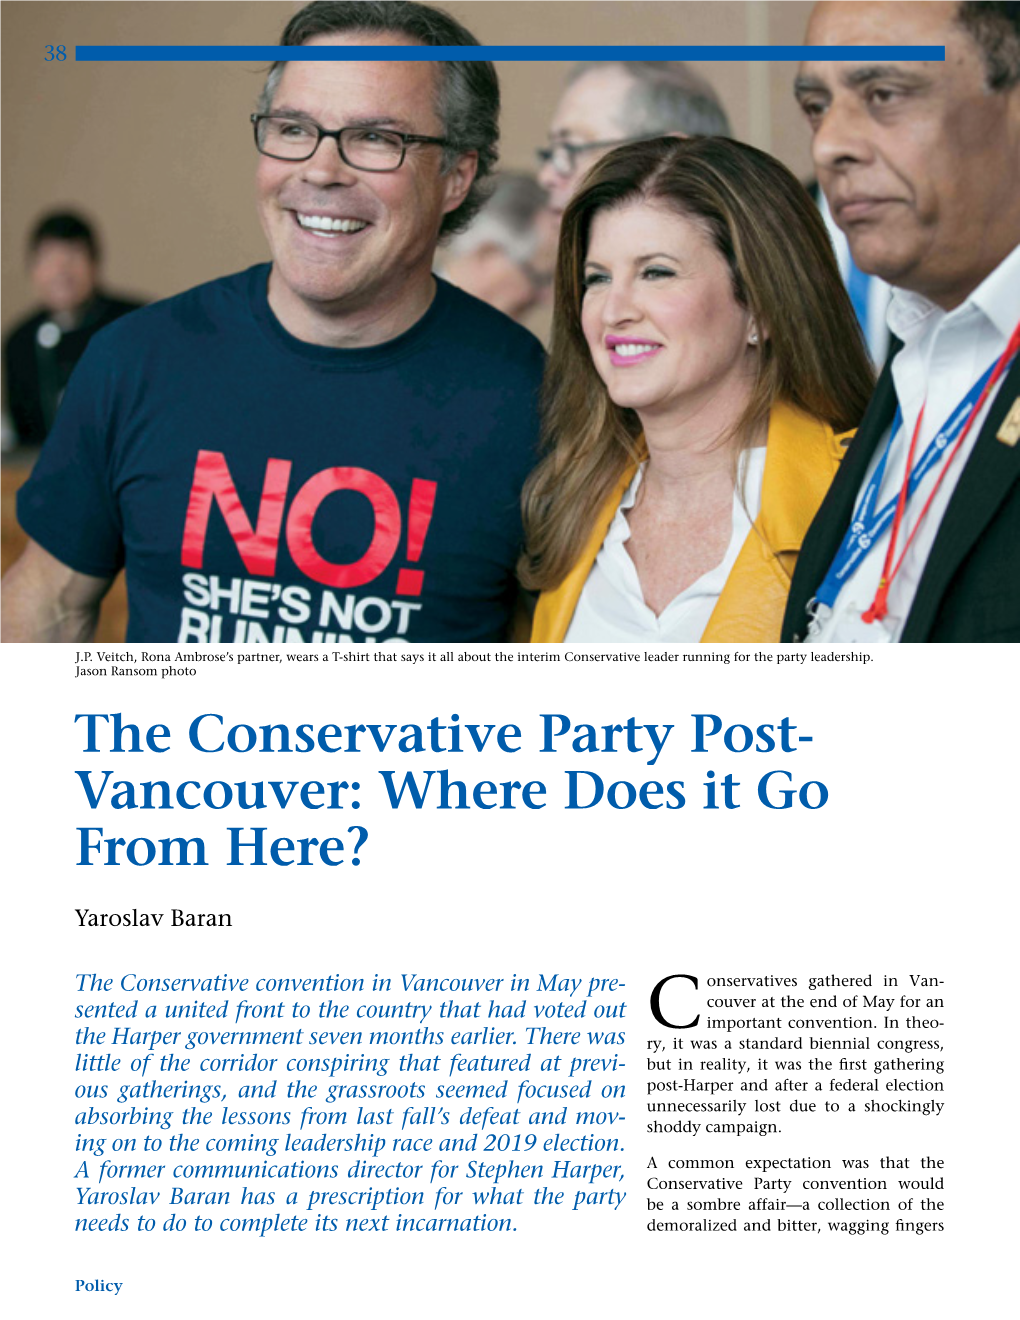 The Conservative Party Post- Vancouver: Where Does It Go from Here?